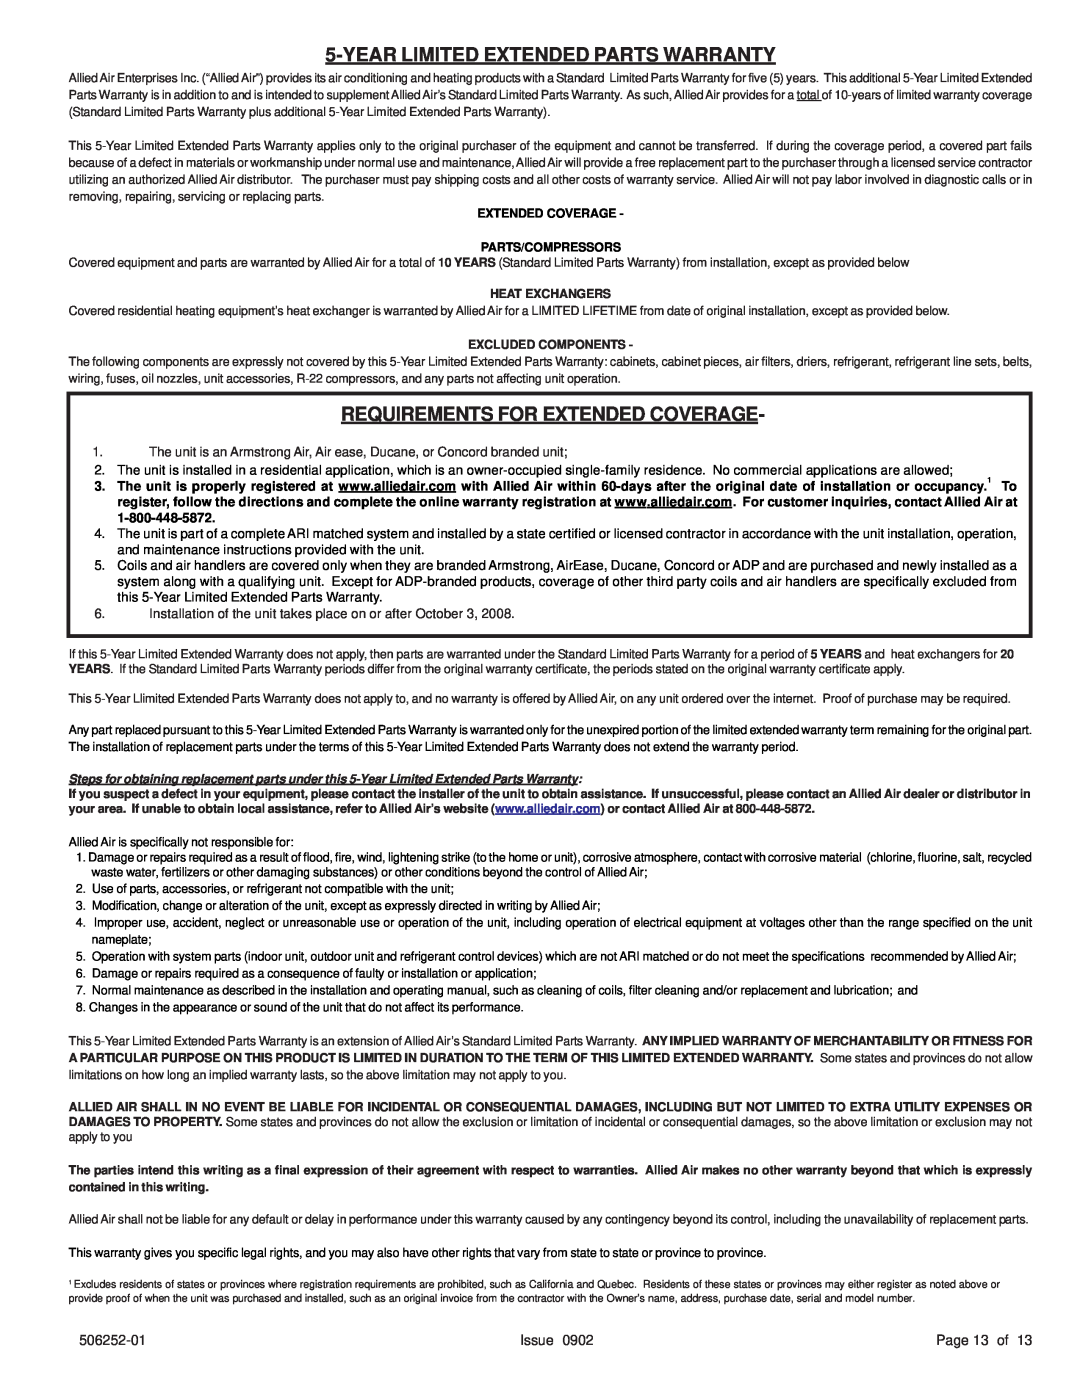 Allied Air Enterprises 15), (2 Yearlimited Extended Parts Warranty, Requirements For Extended Coverage, Issue, Page 13 of 